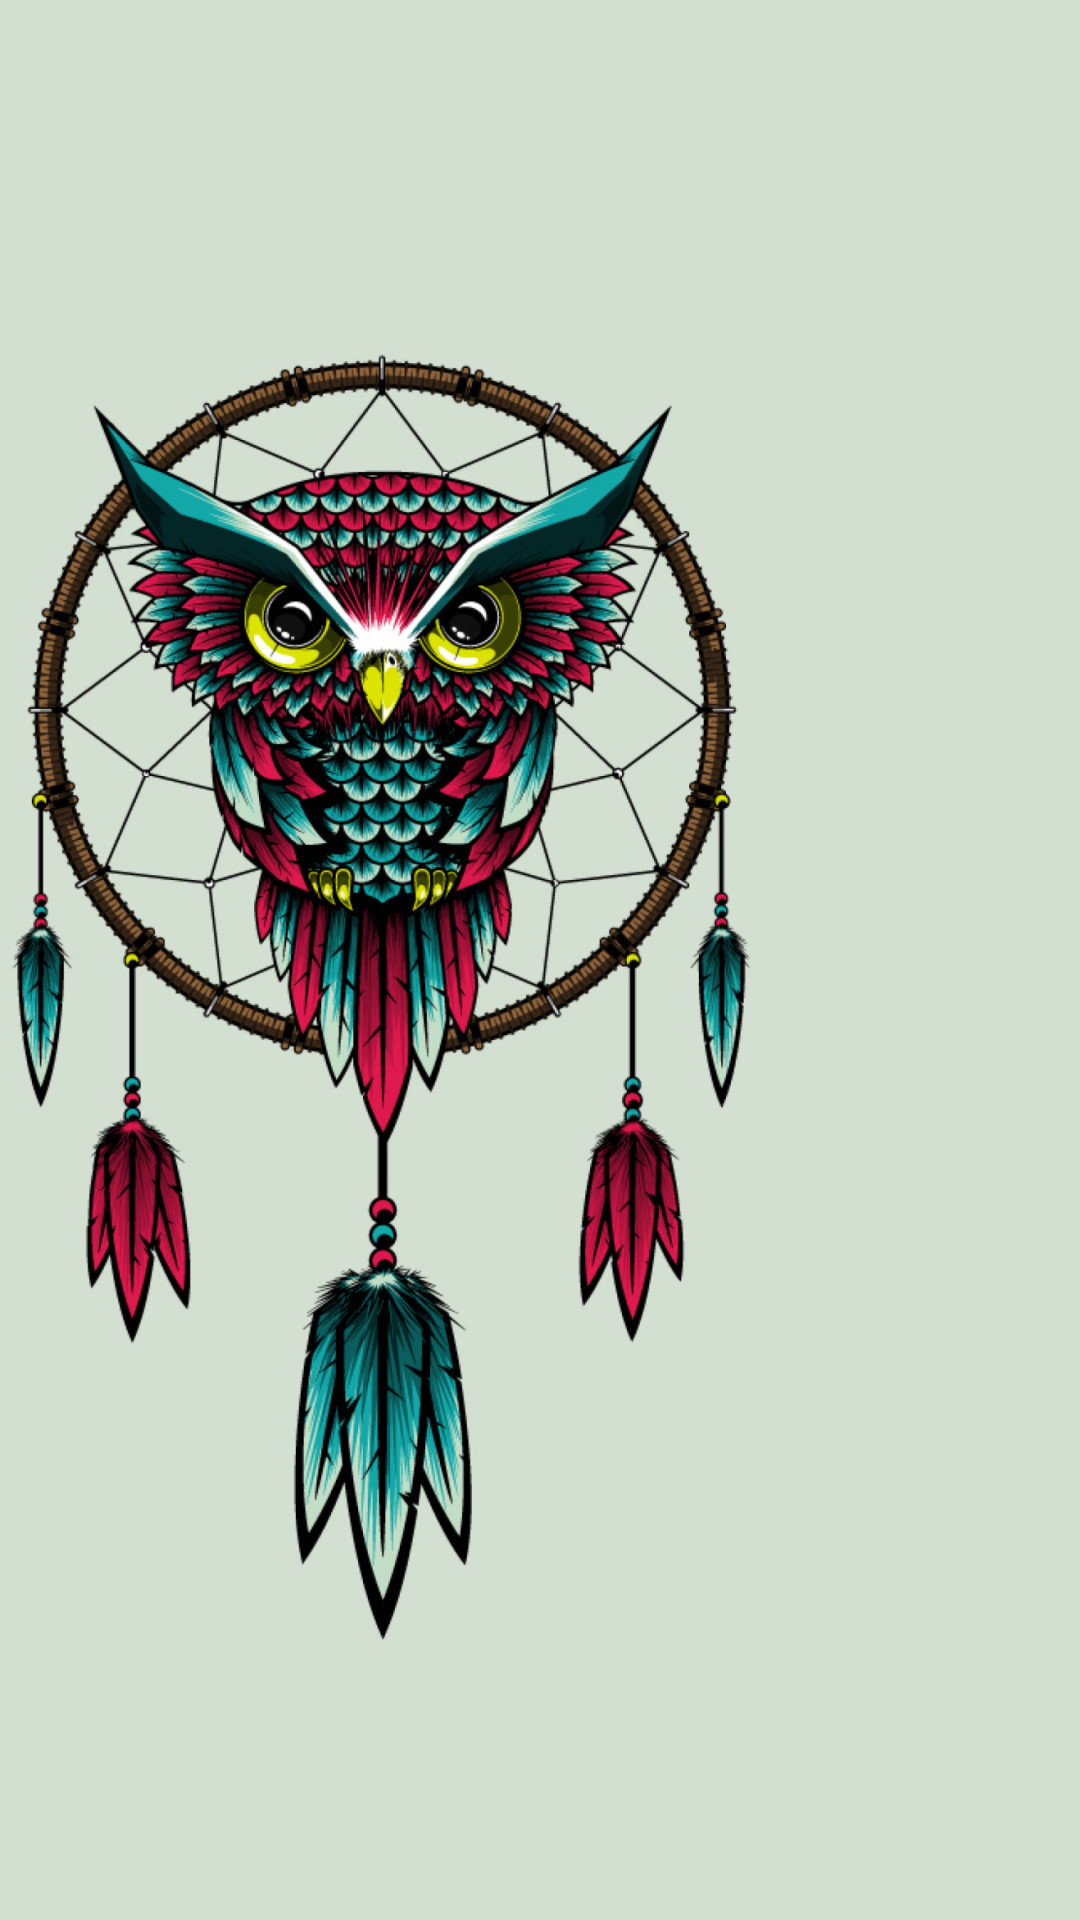 1080x1920 Owl Bird Dreamcatcher - Tap to see more beautifully creative dreamcatcher  wallpapers!